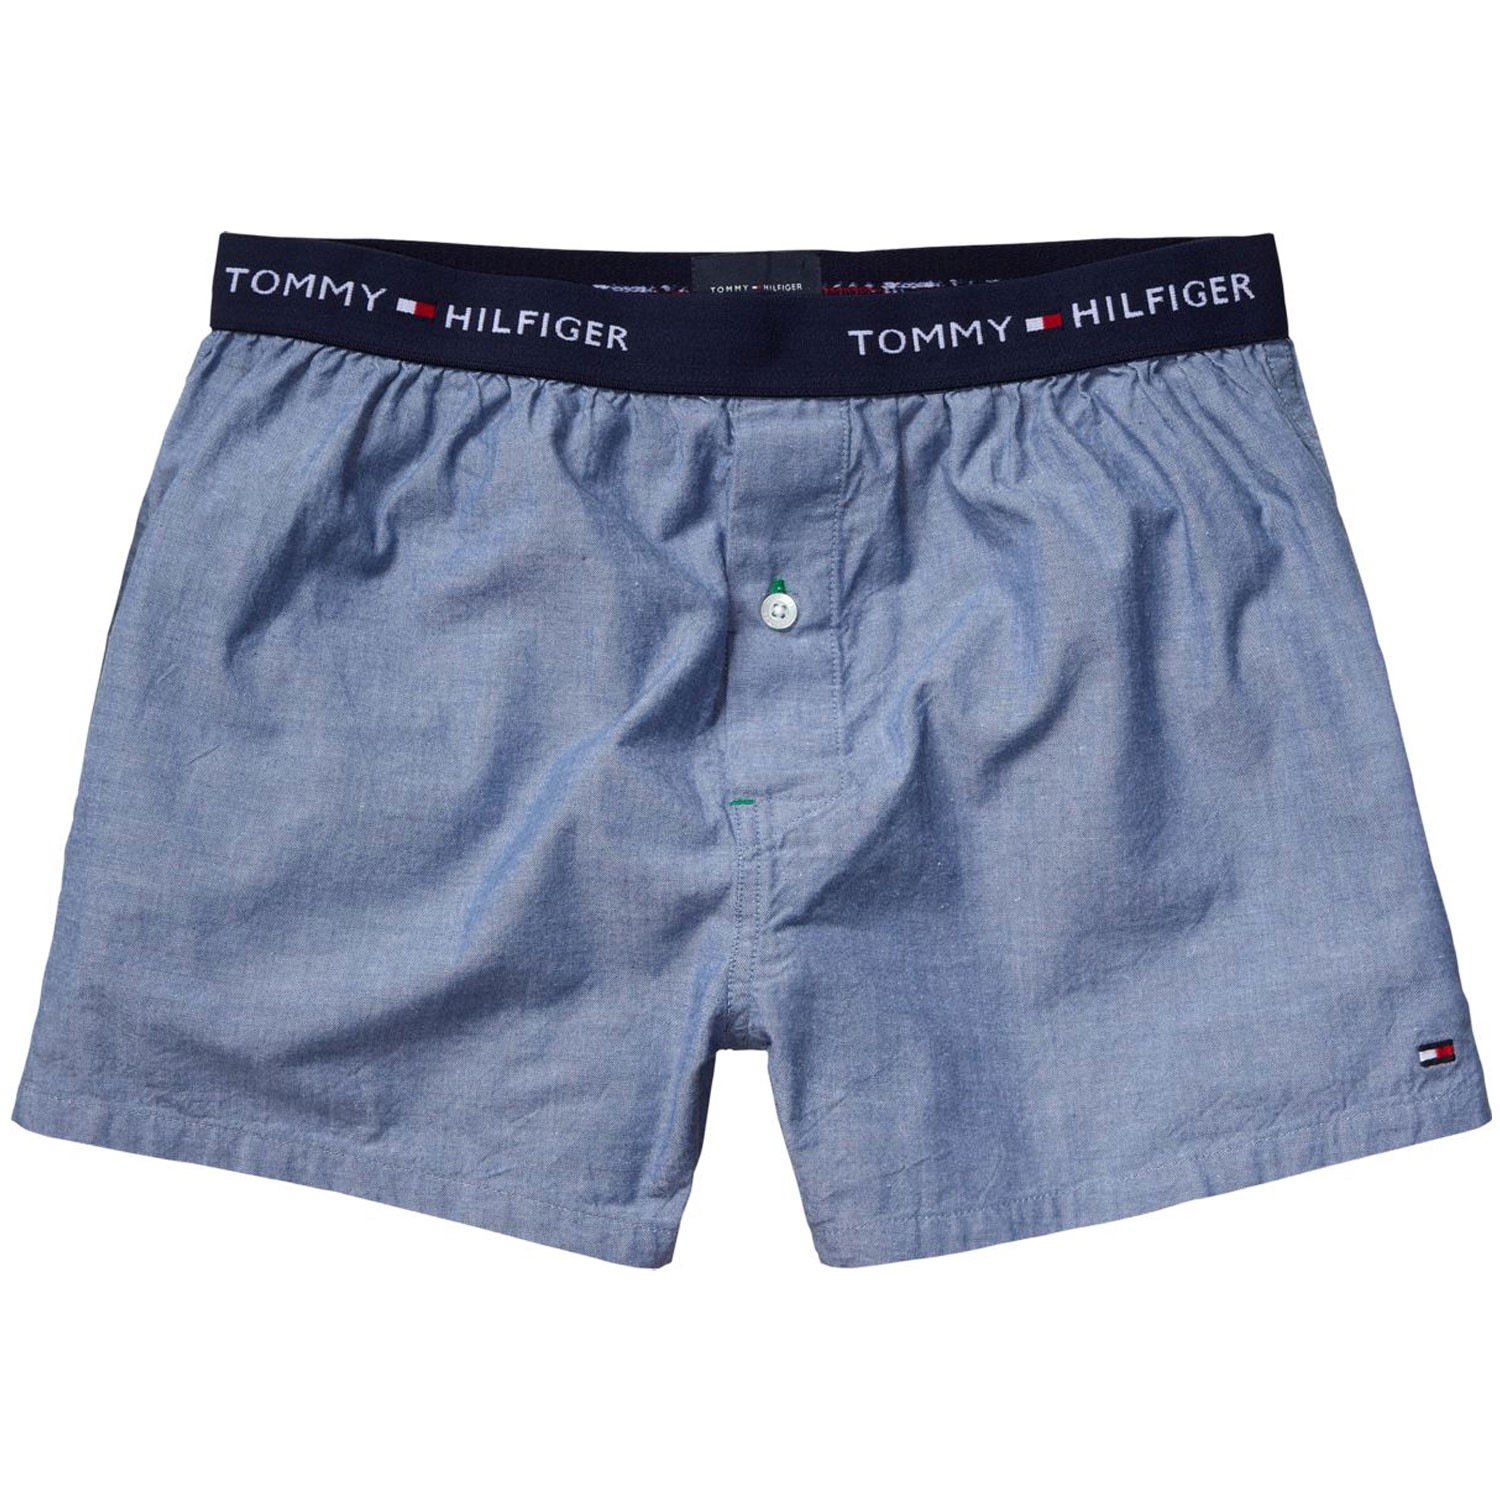 Tommy Hilfiger Woven Boxer Sal